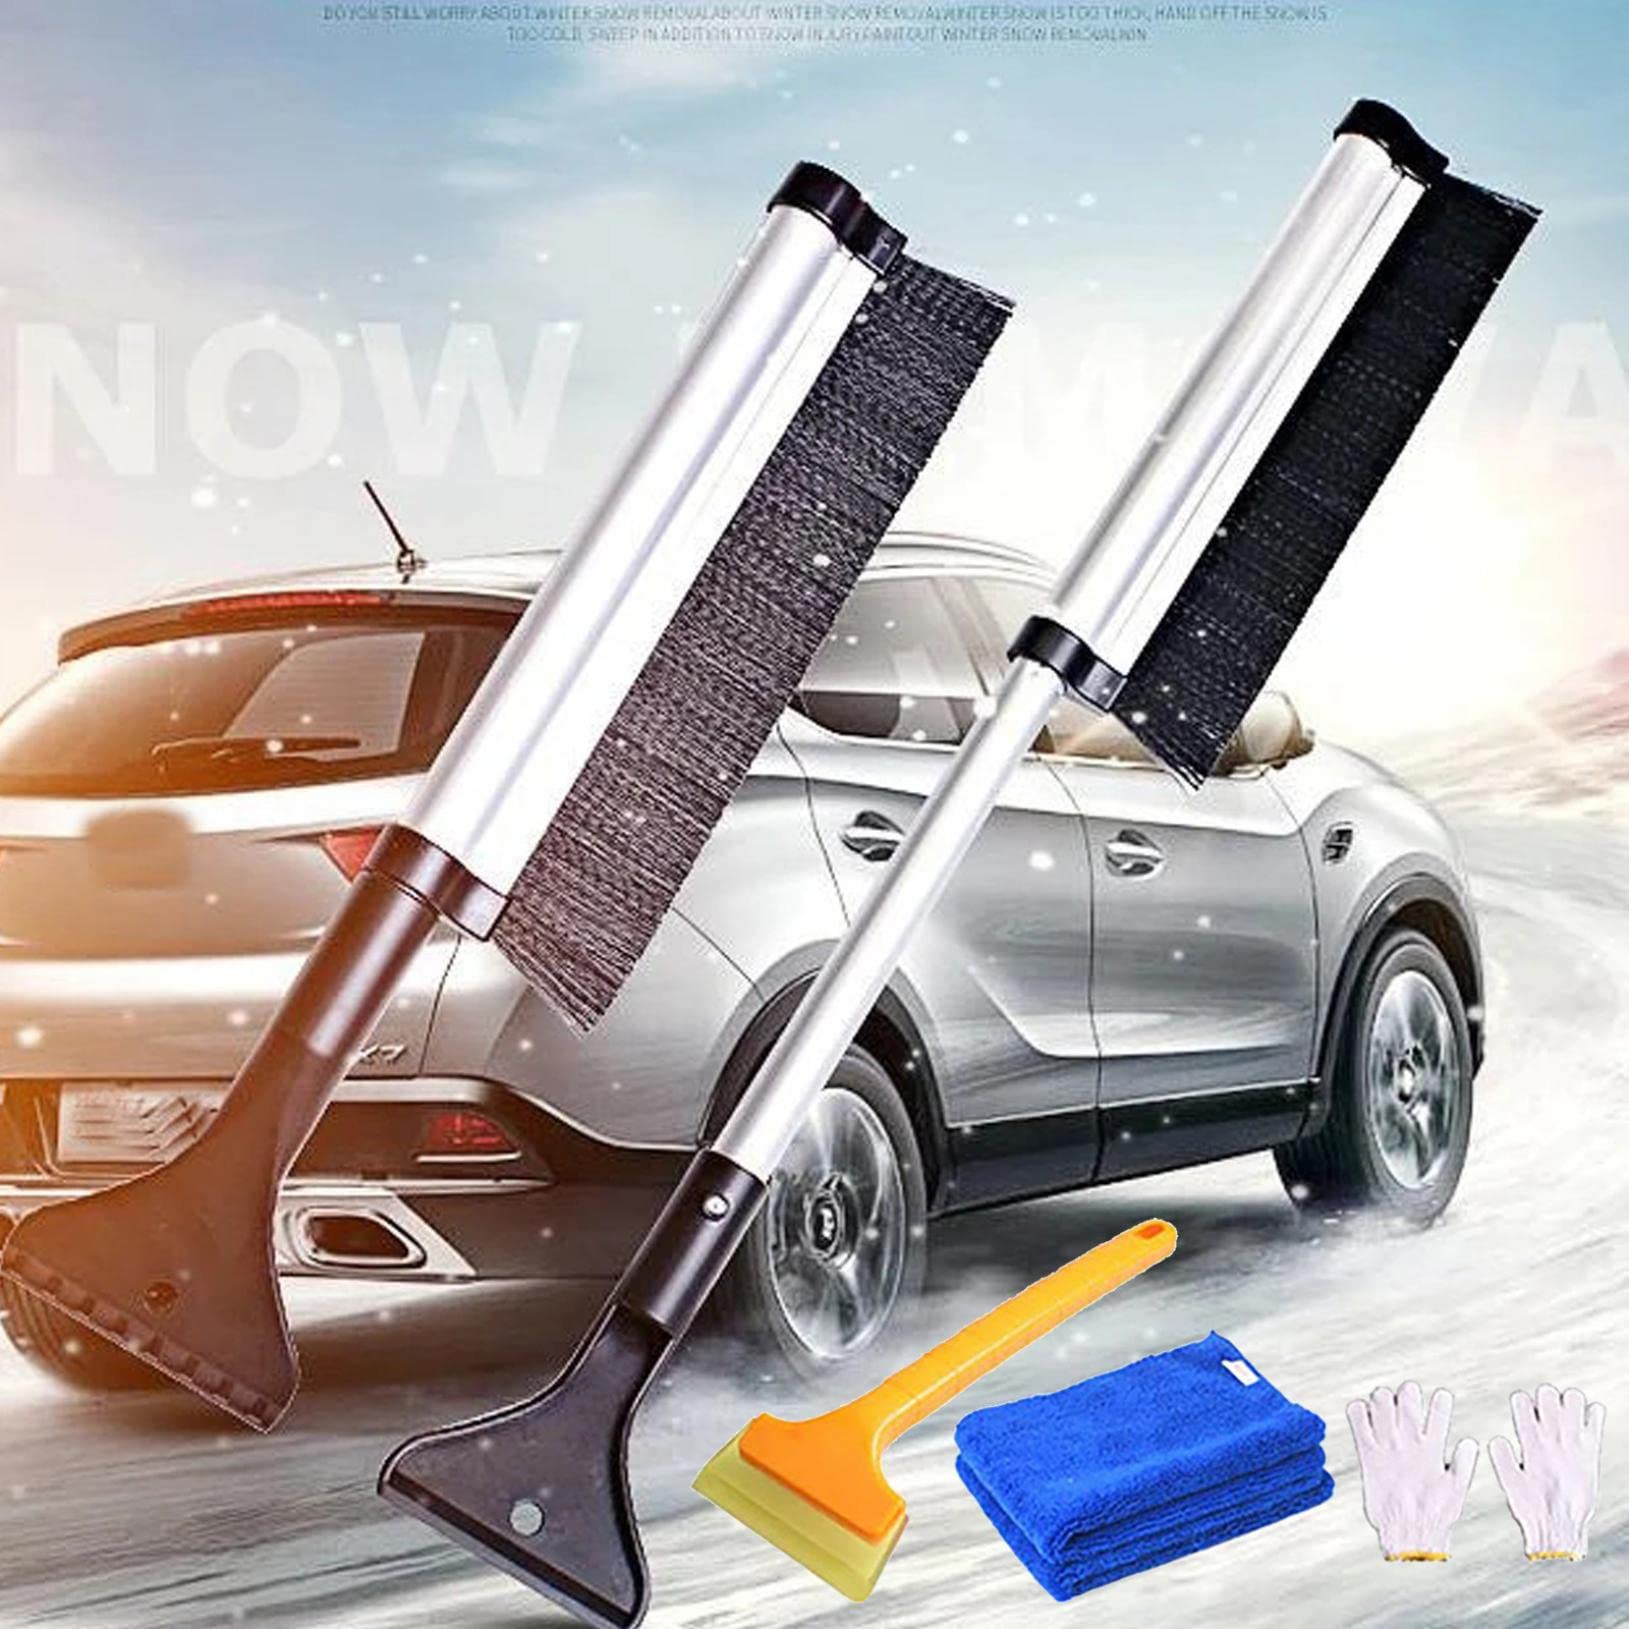 ZQTWJ Ice Scraper with Snow Brush for Car Windshield, 4-Piece Set Window Cleaning Tool for Car, 2-in-1 Retractable Car Snow Brush,Car Windshield Snow Remover with Towel,Gloves,Oxford Scraper von ZQTWJ